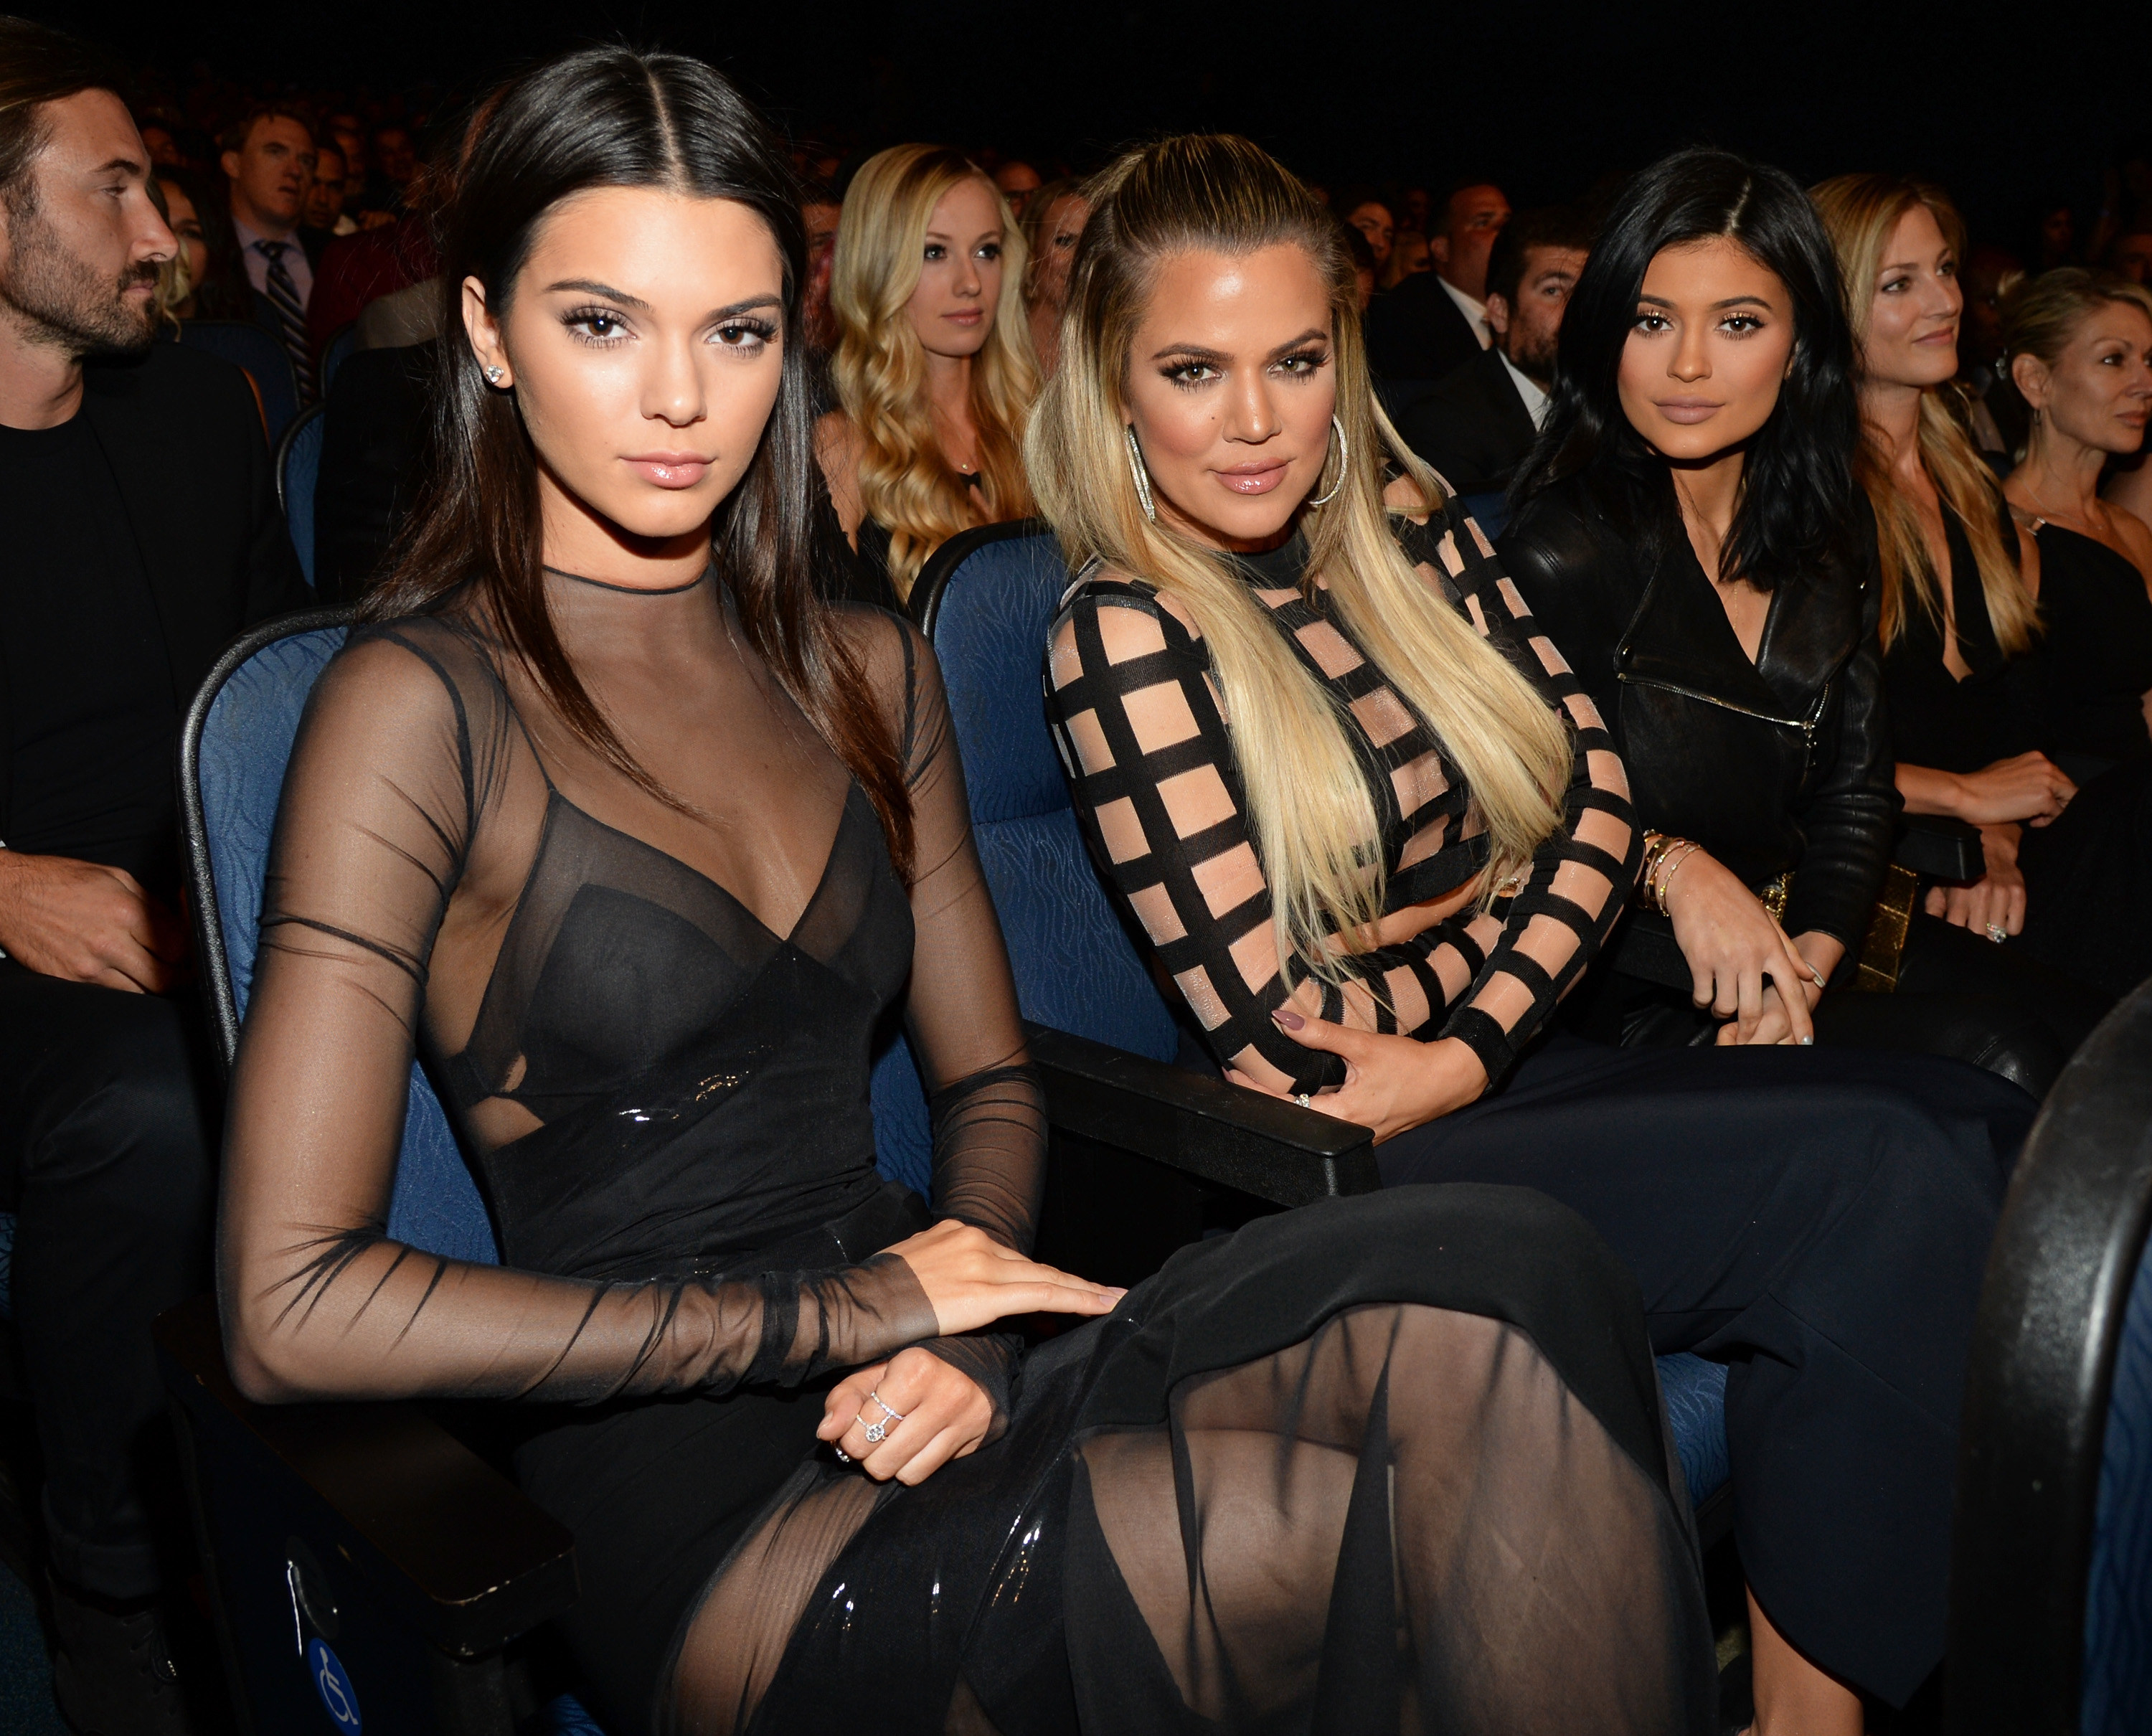 Kendall Jenner, Khloé Kardashian, and Kylie Jenner sit in a seated row at an event